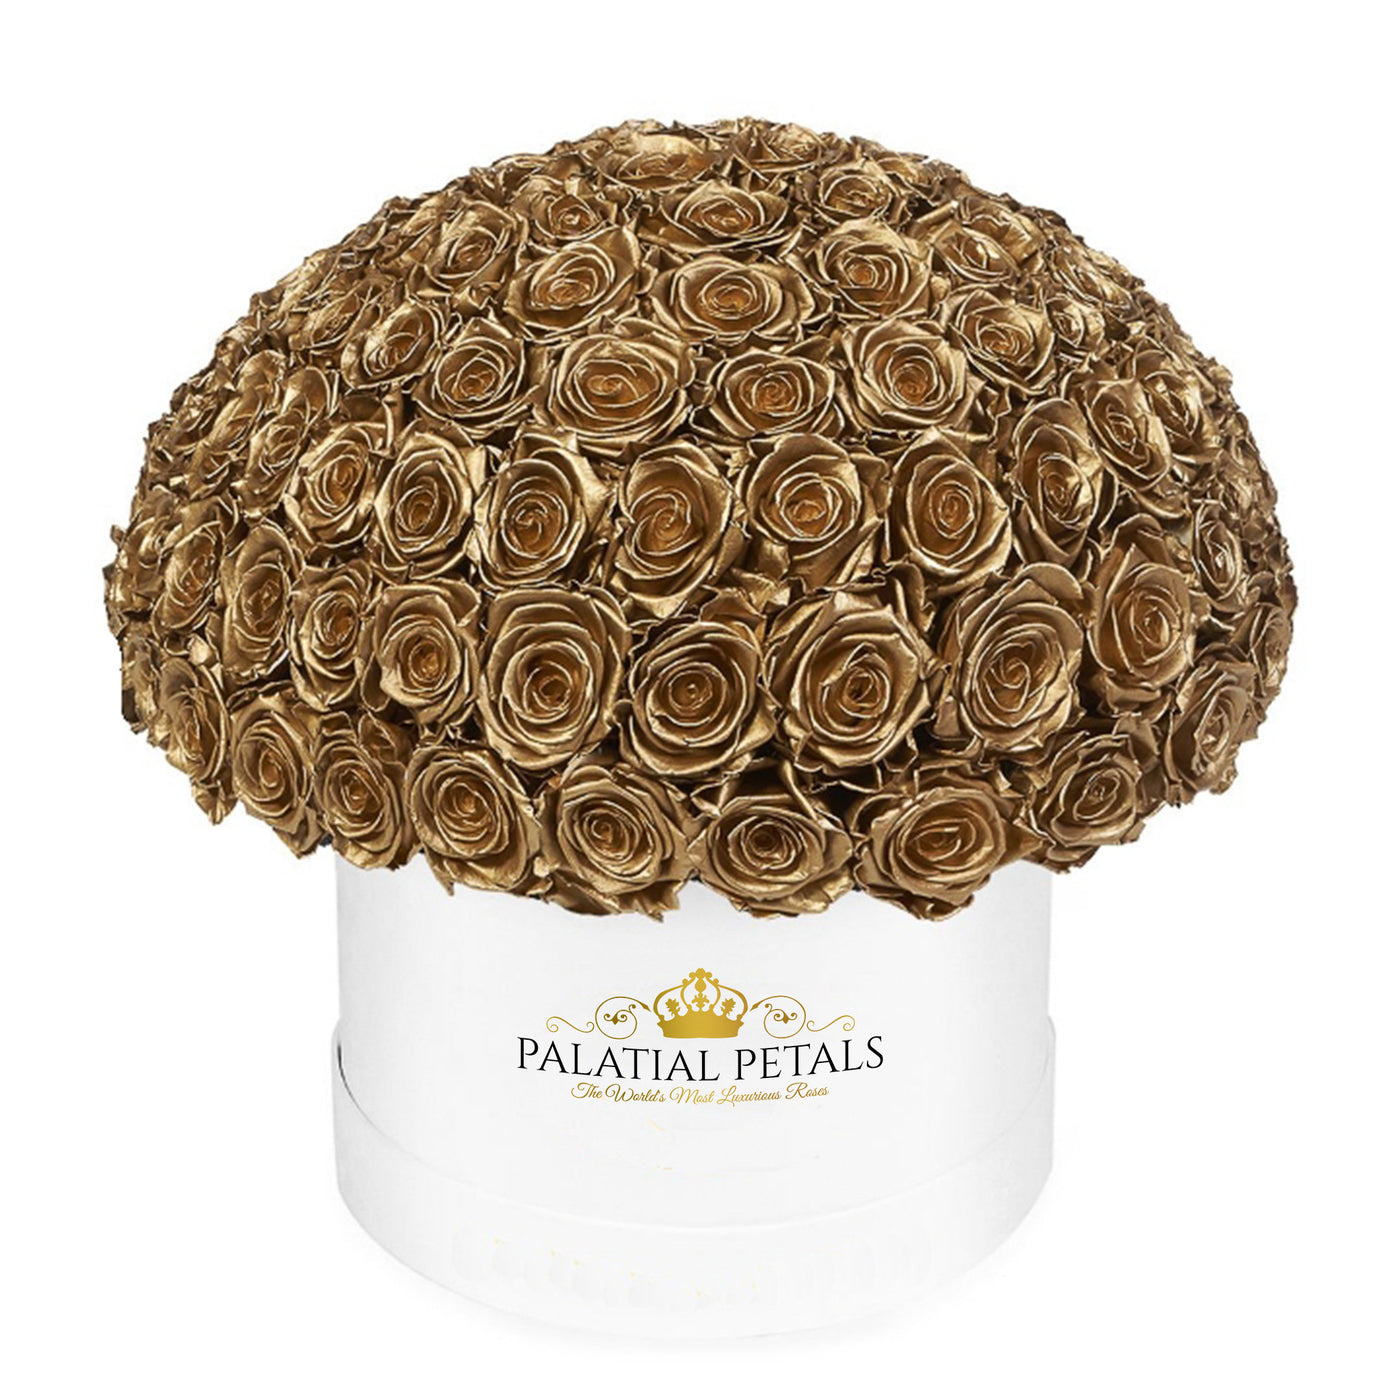 24k Gold Roses That Last A Year - Grande "Crown" Rose Box